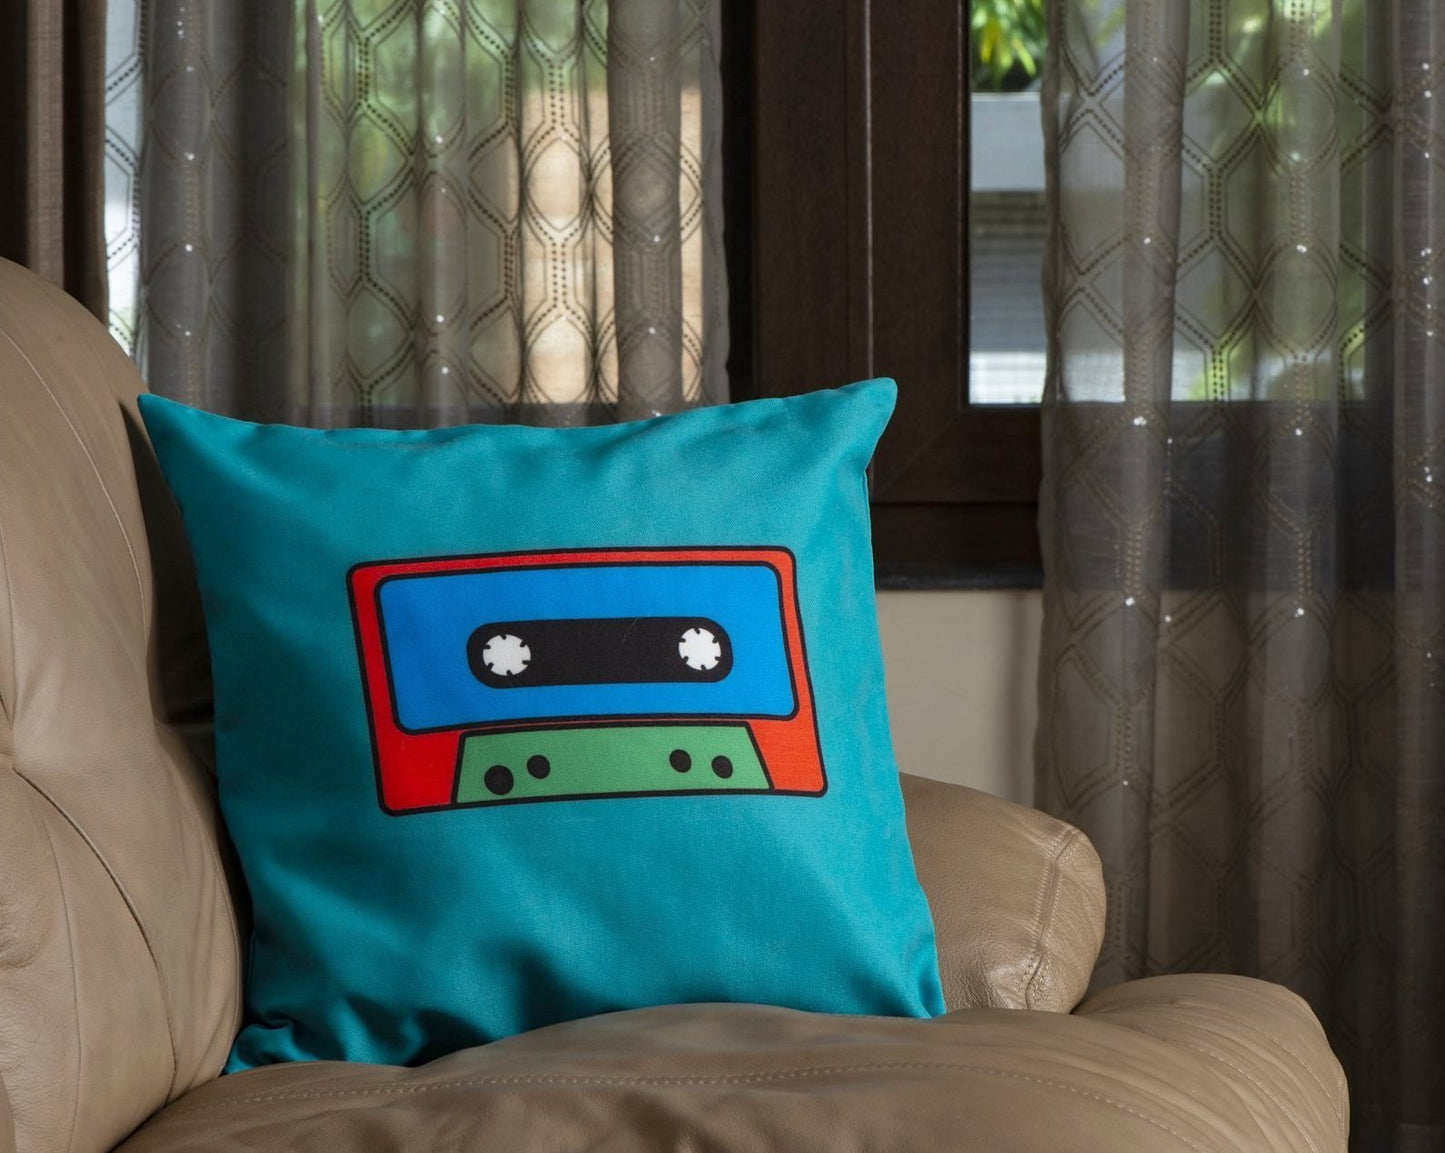 Rewind Time Cushion Cover